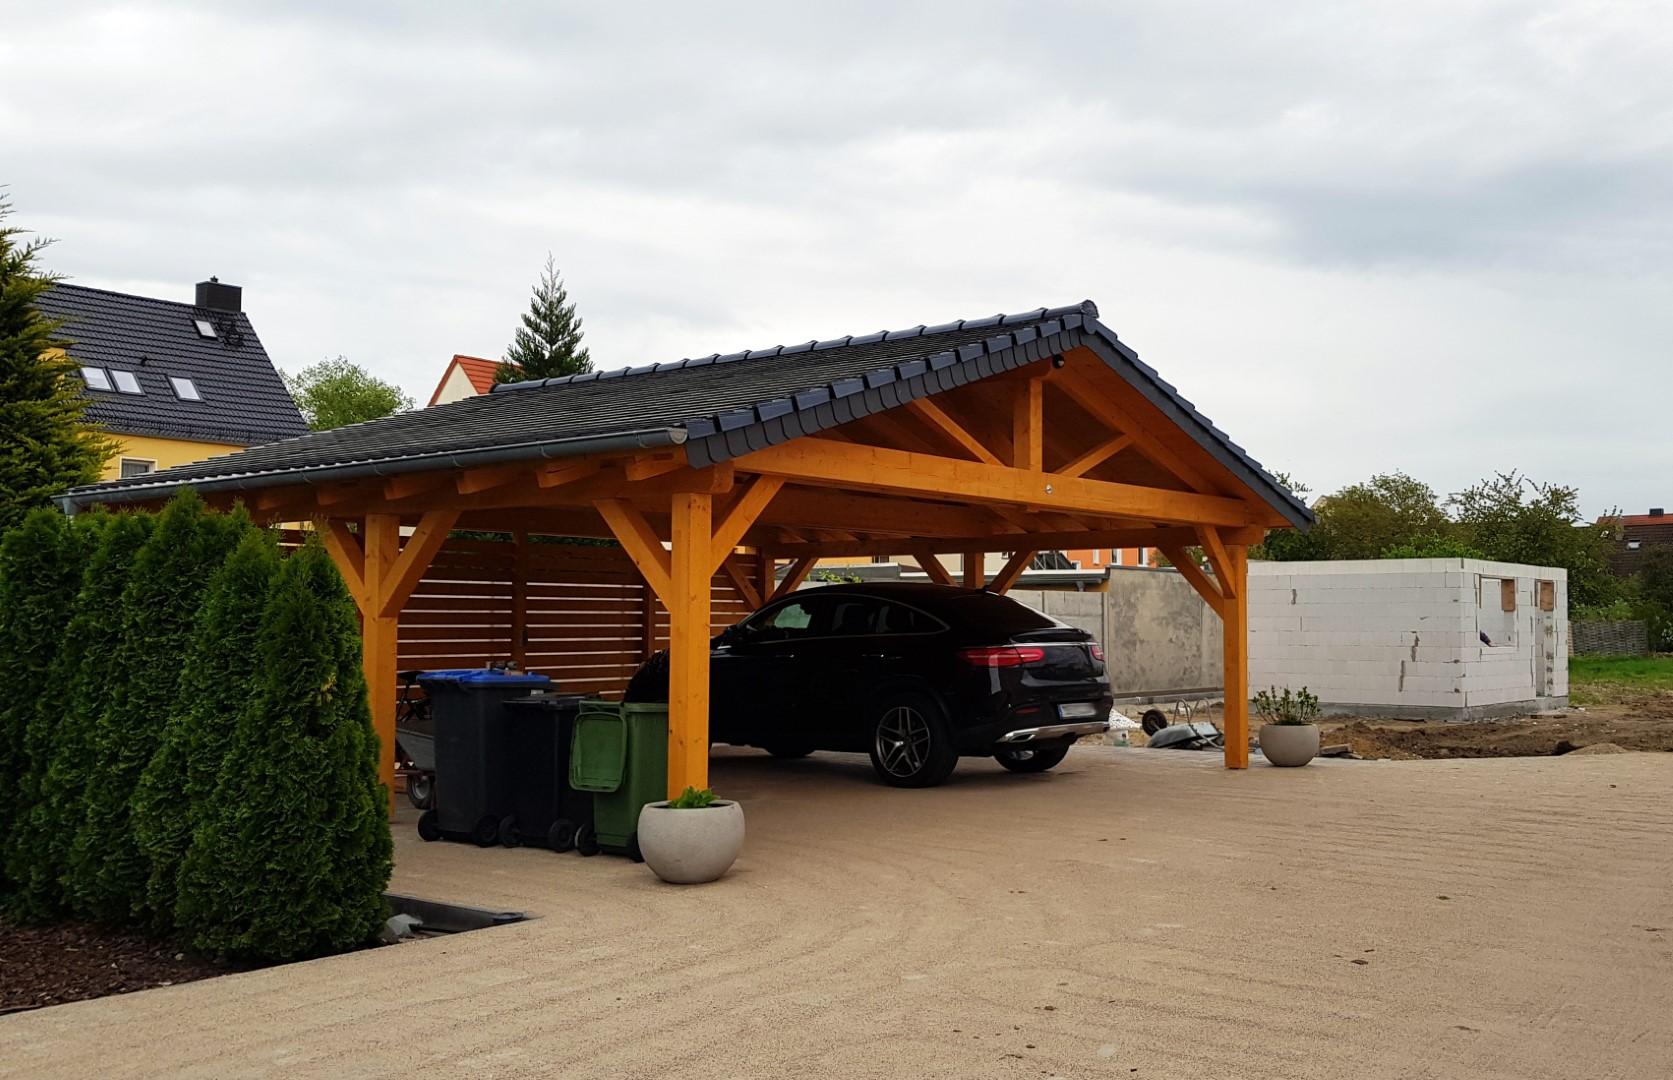 Carport,To,Protect,The,Car